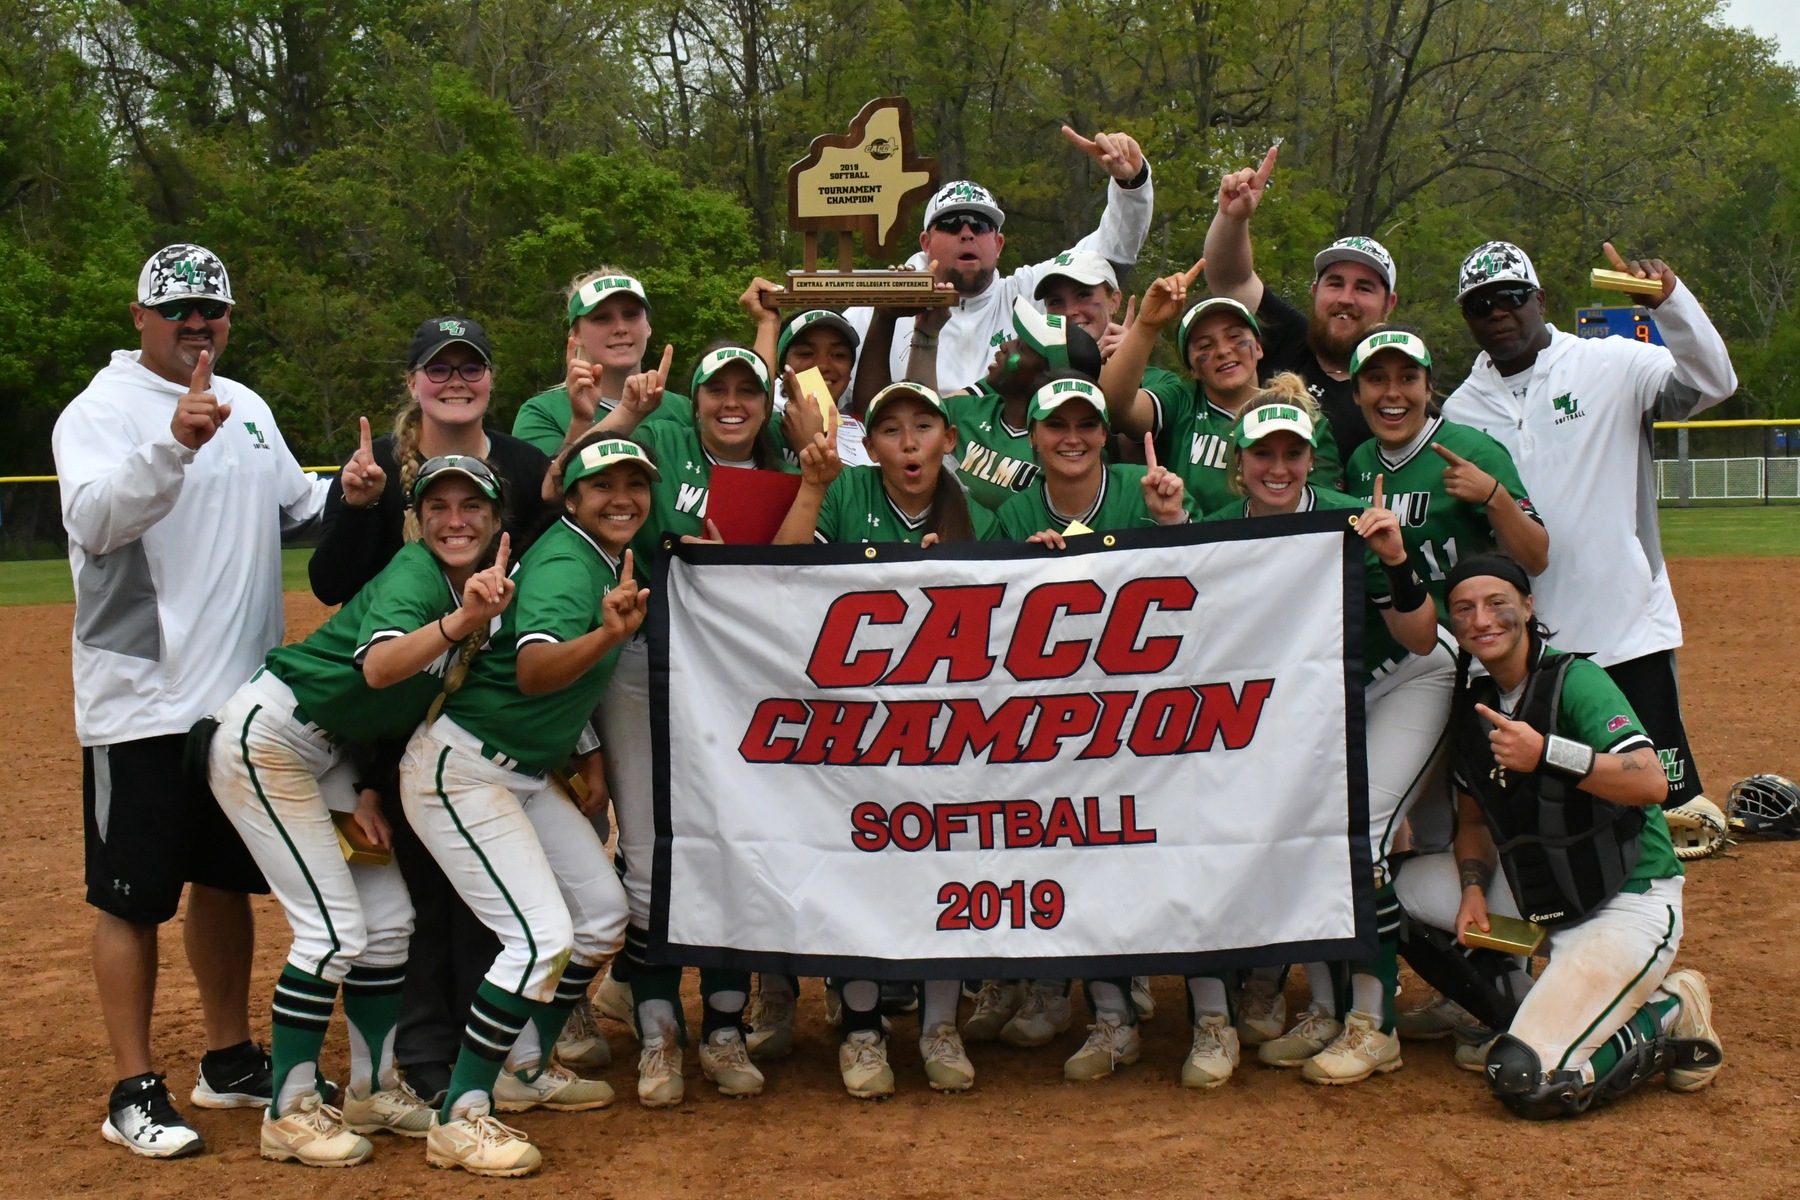 Copyright 2019; Wilmington University. All rights reserved. Photo by Erin O'Brien, CACC Office. May 4, 2019 at Lakewood, N.J., Georgian Court University.